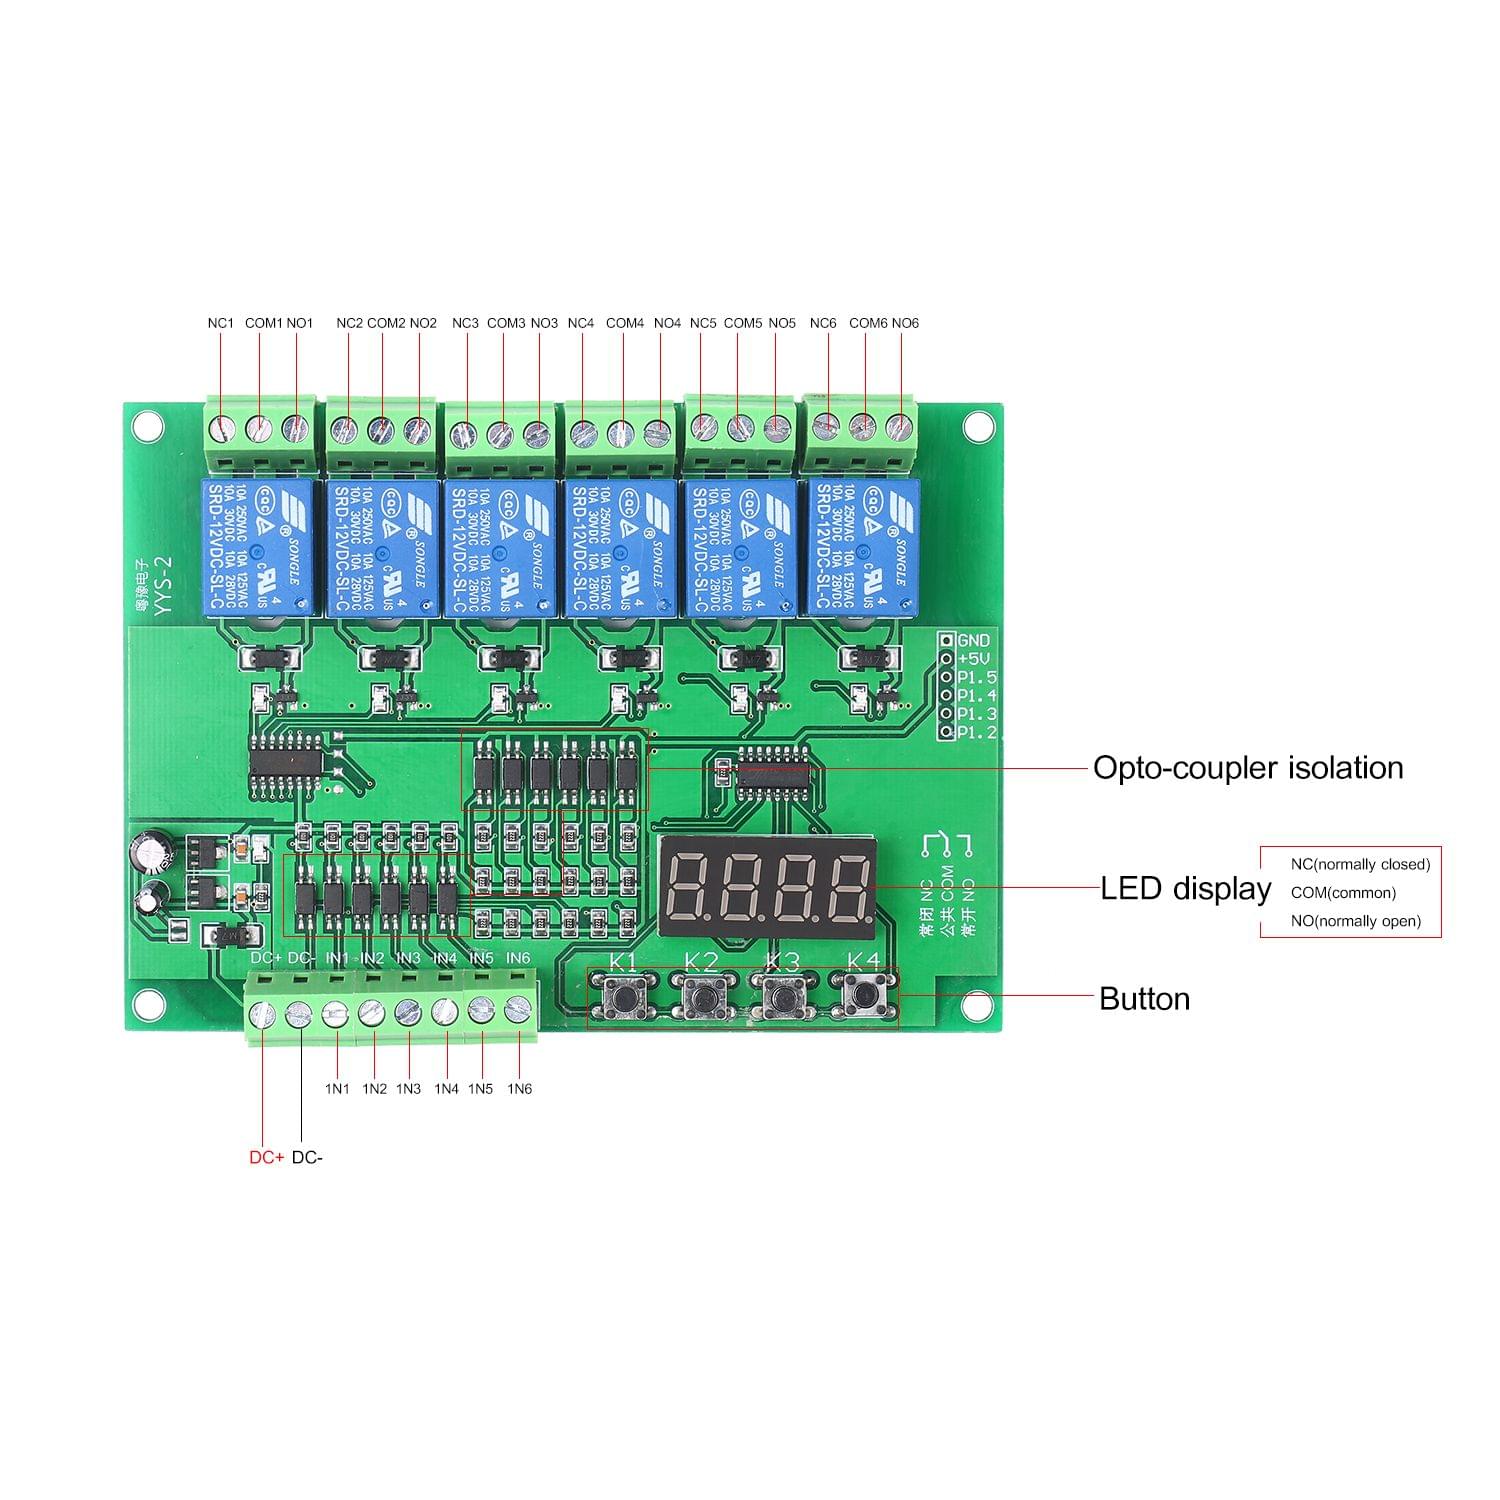 DC 12V Programmable 6-Channel Relay Module Timing Cycle Time - DC 12V